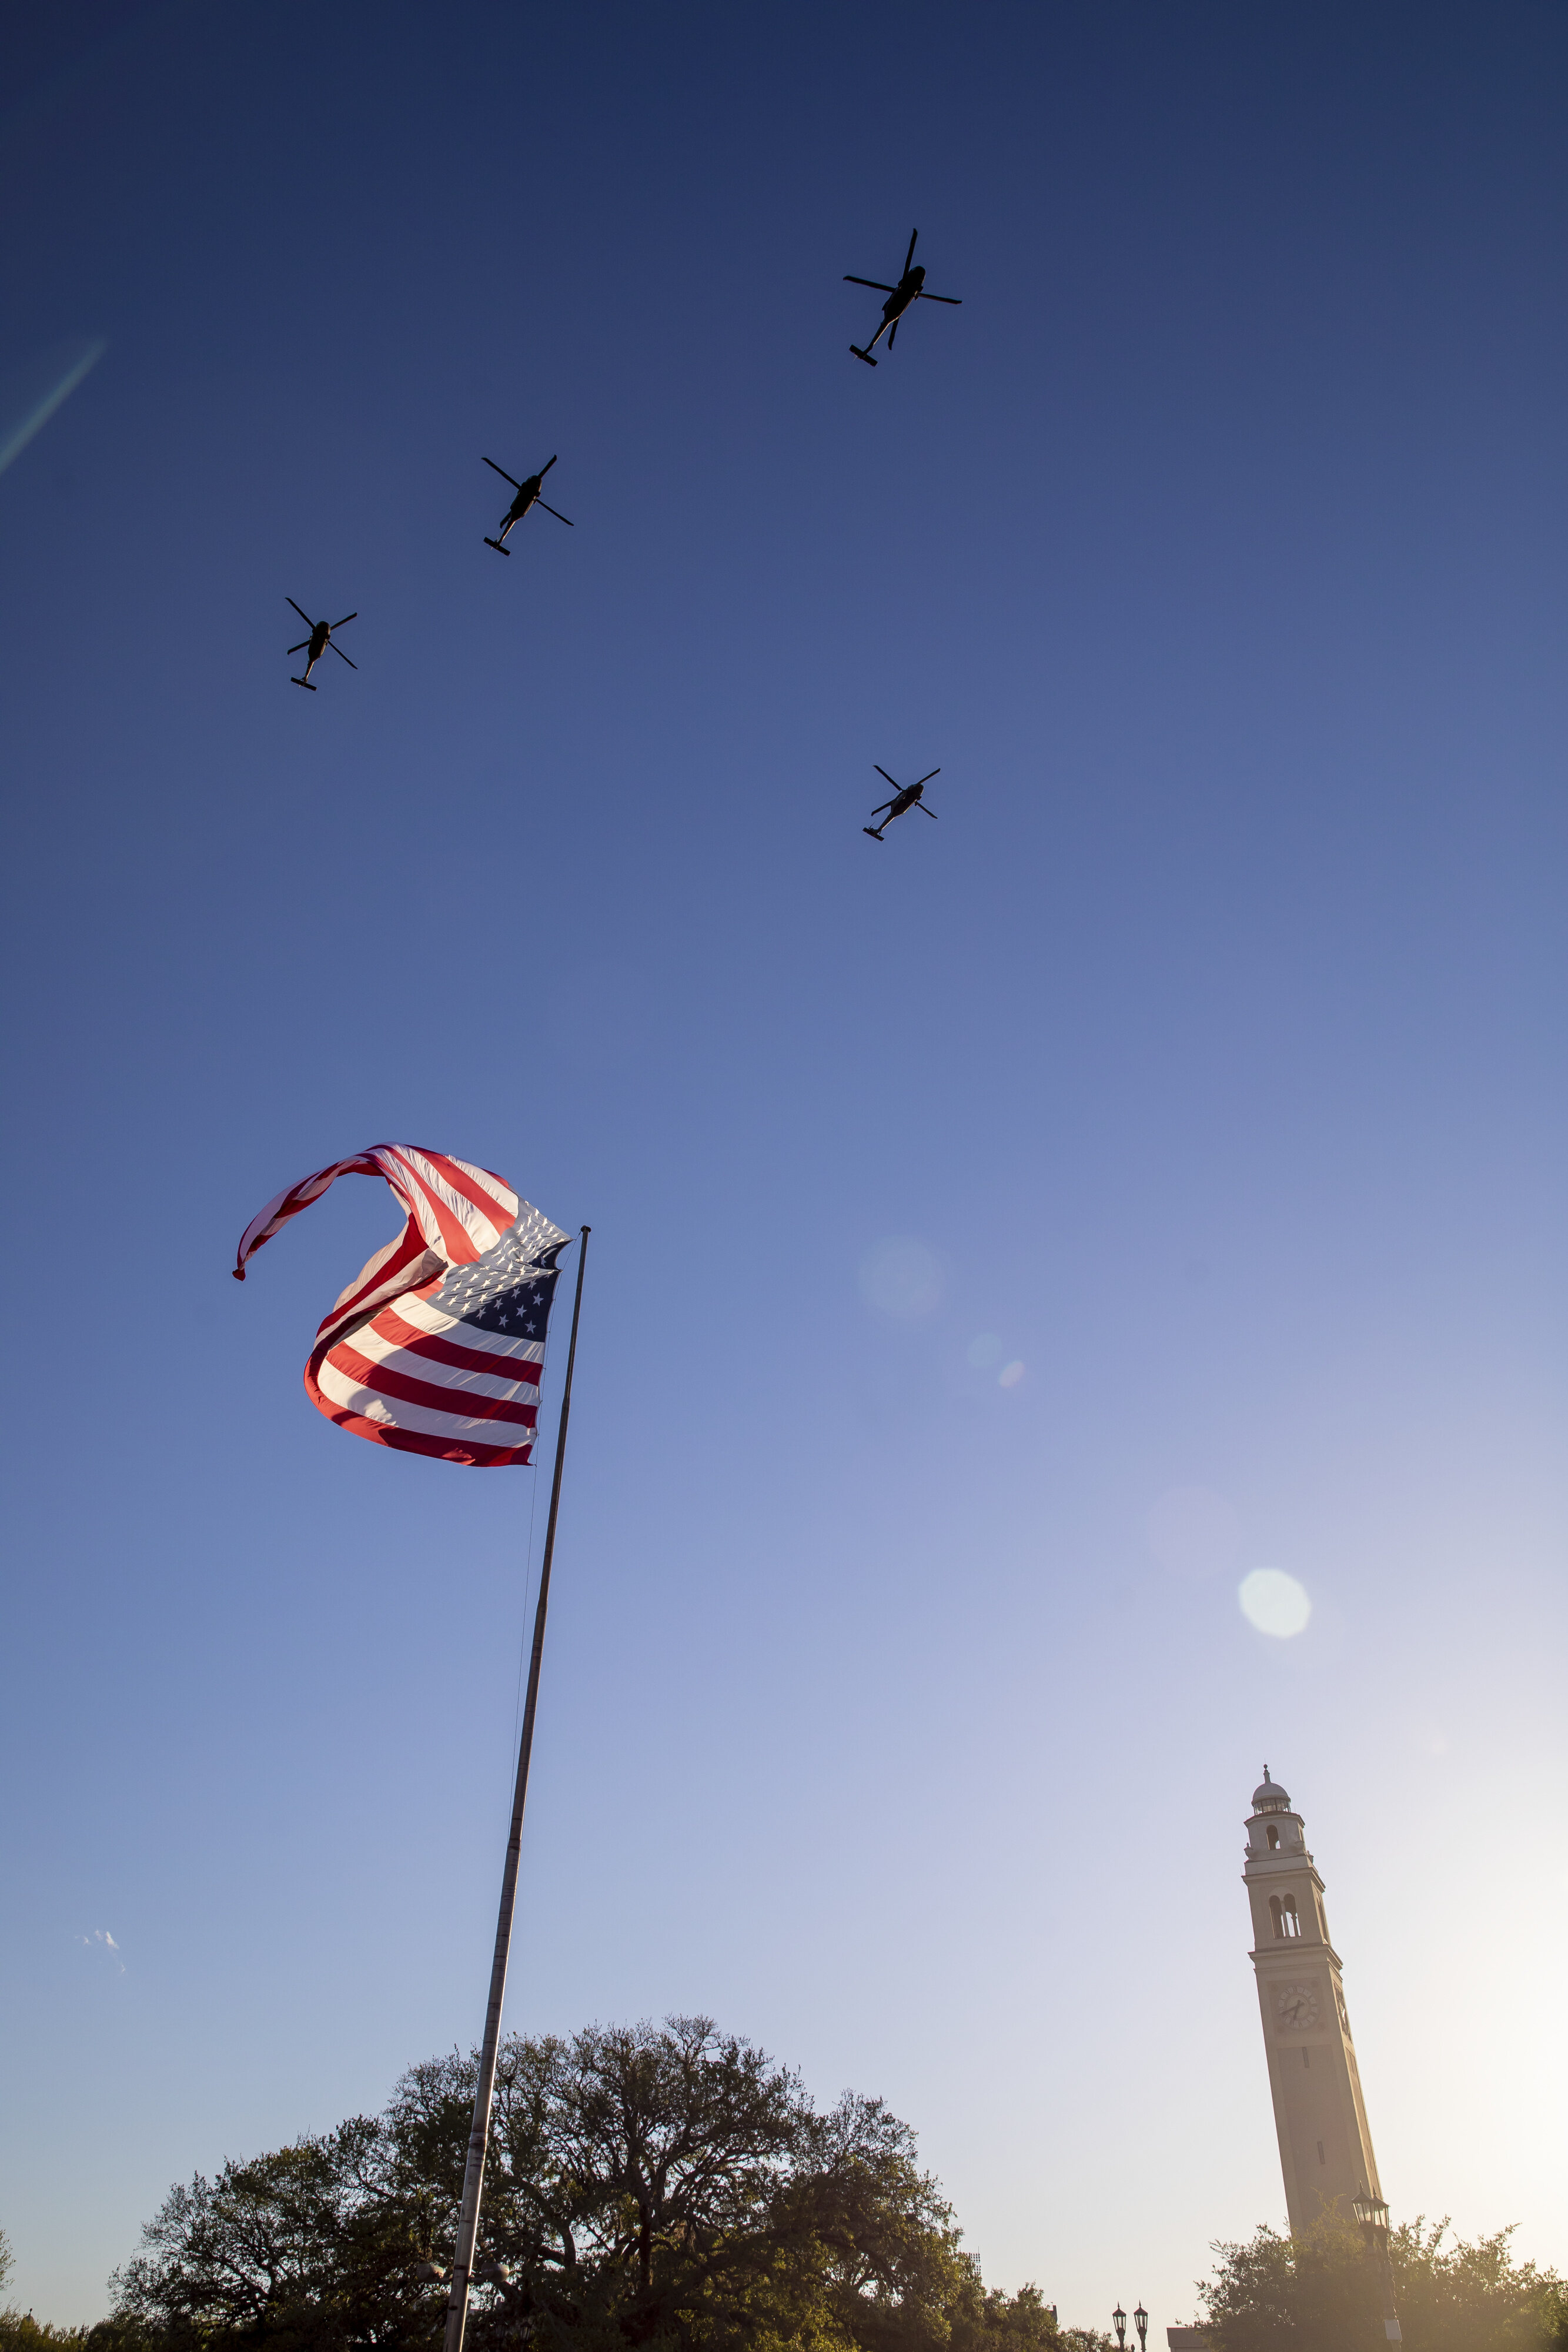 USA flag with military helicopters overhead